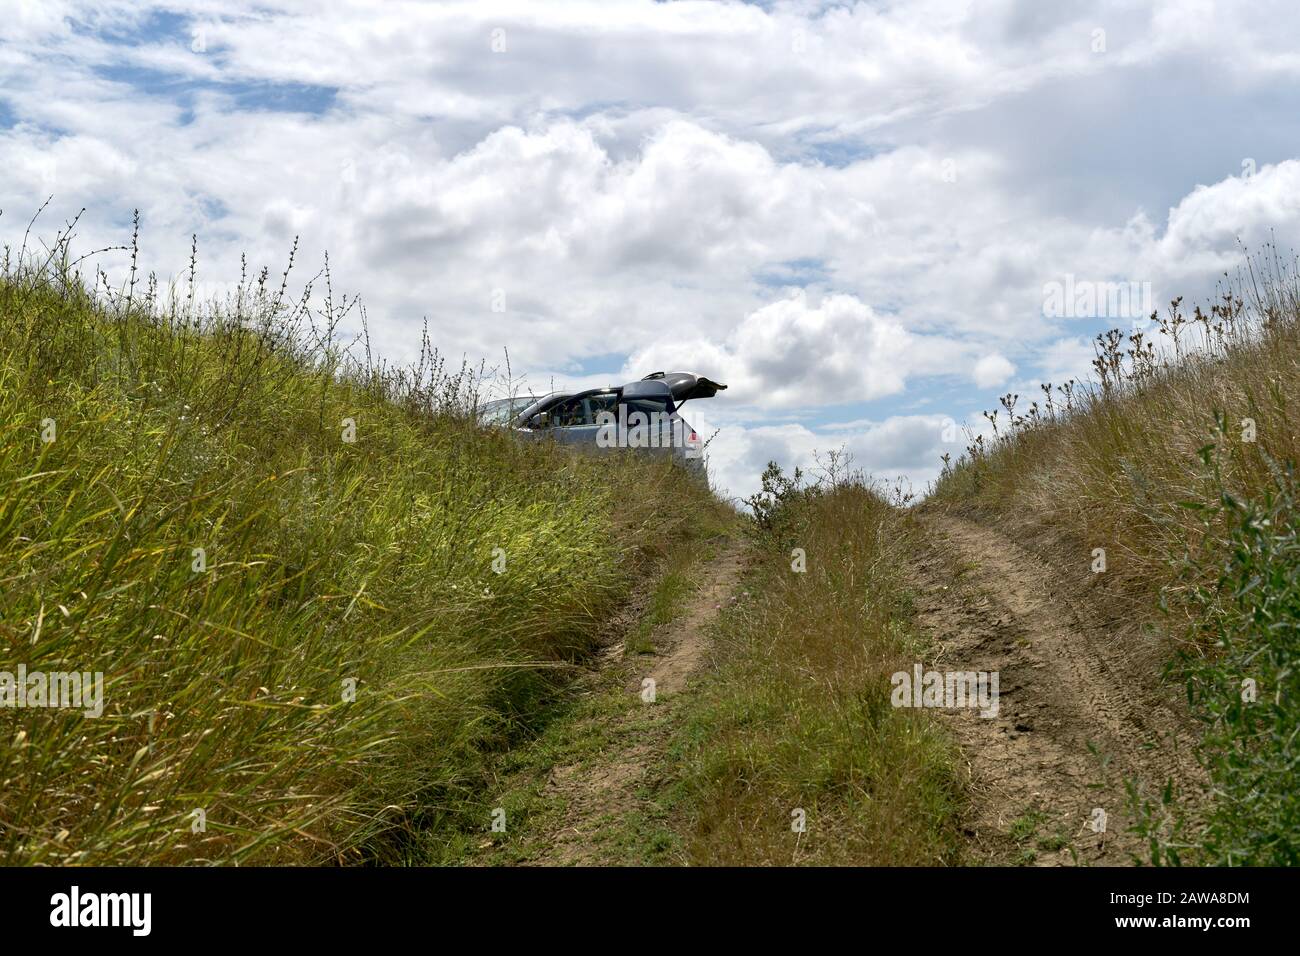 The dirt road leading up to the car is partially visible with an open raised trunk on a hill among the steppe grasses. Stock Photo